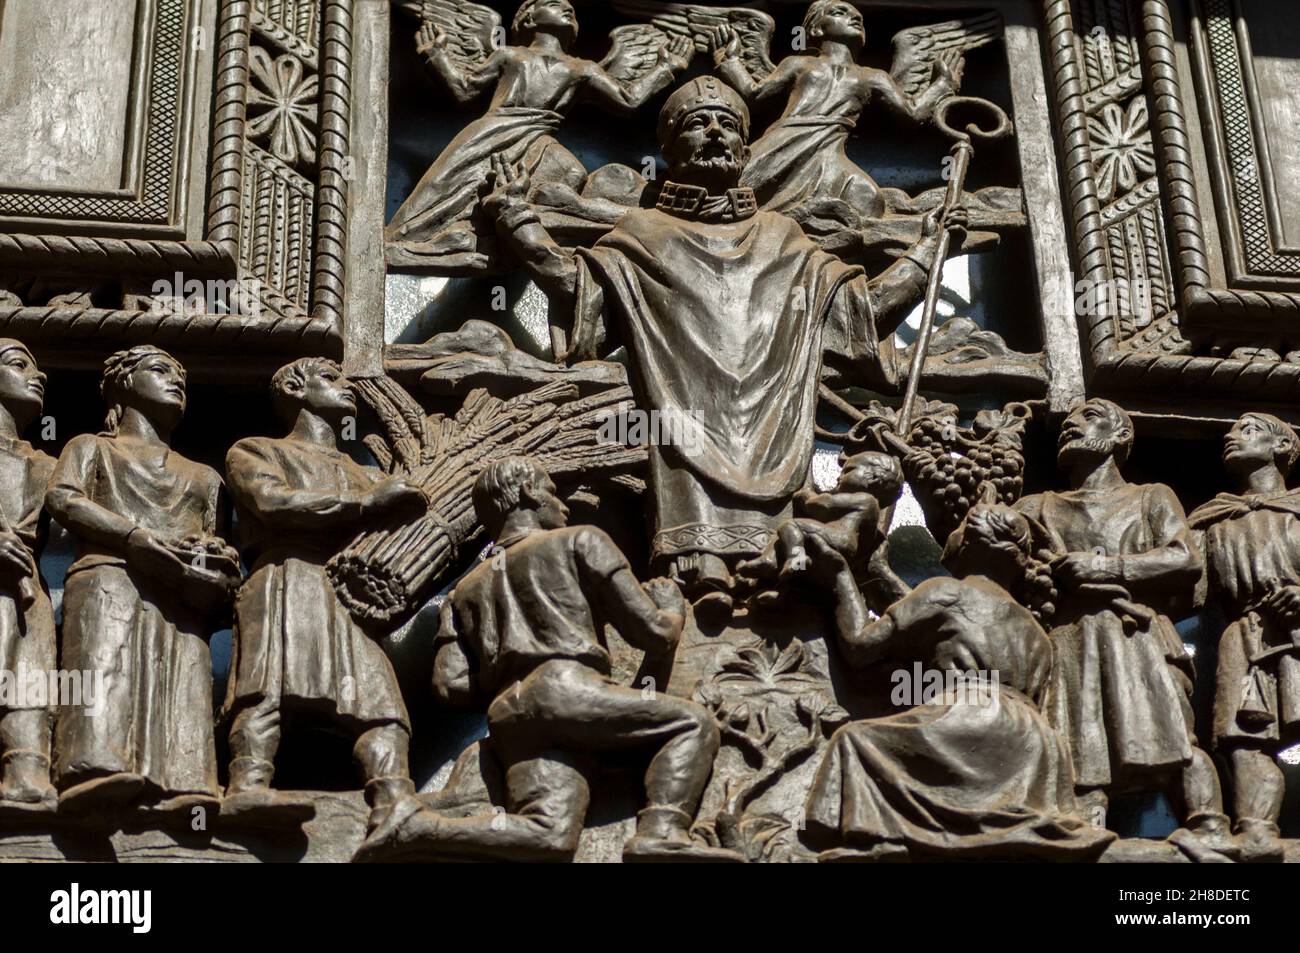 Detail of a bronze sculpture over a side door in the main facade of St Vitus Cathedral in Prague. Stock Photo